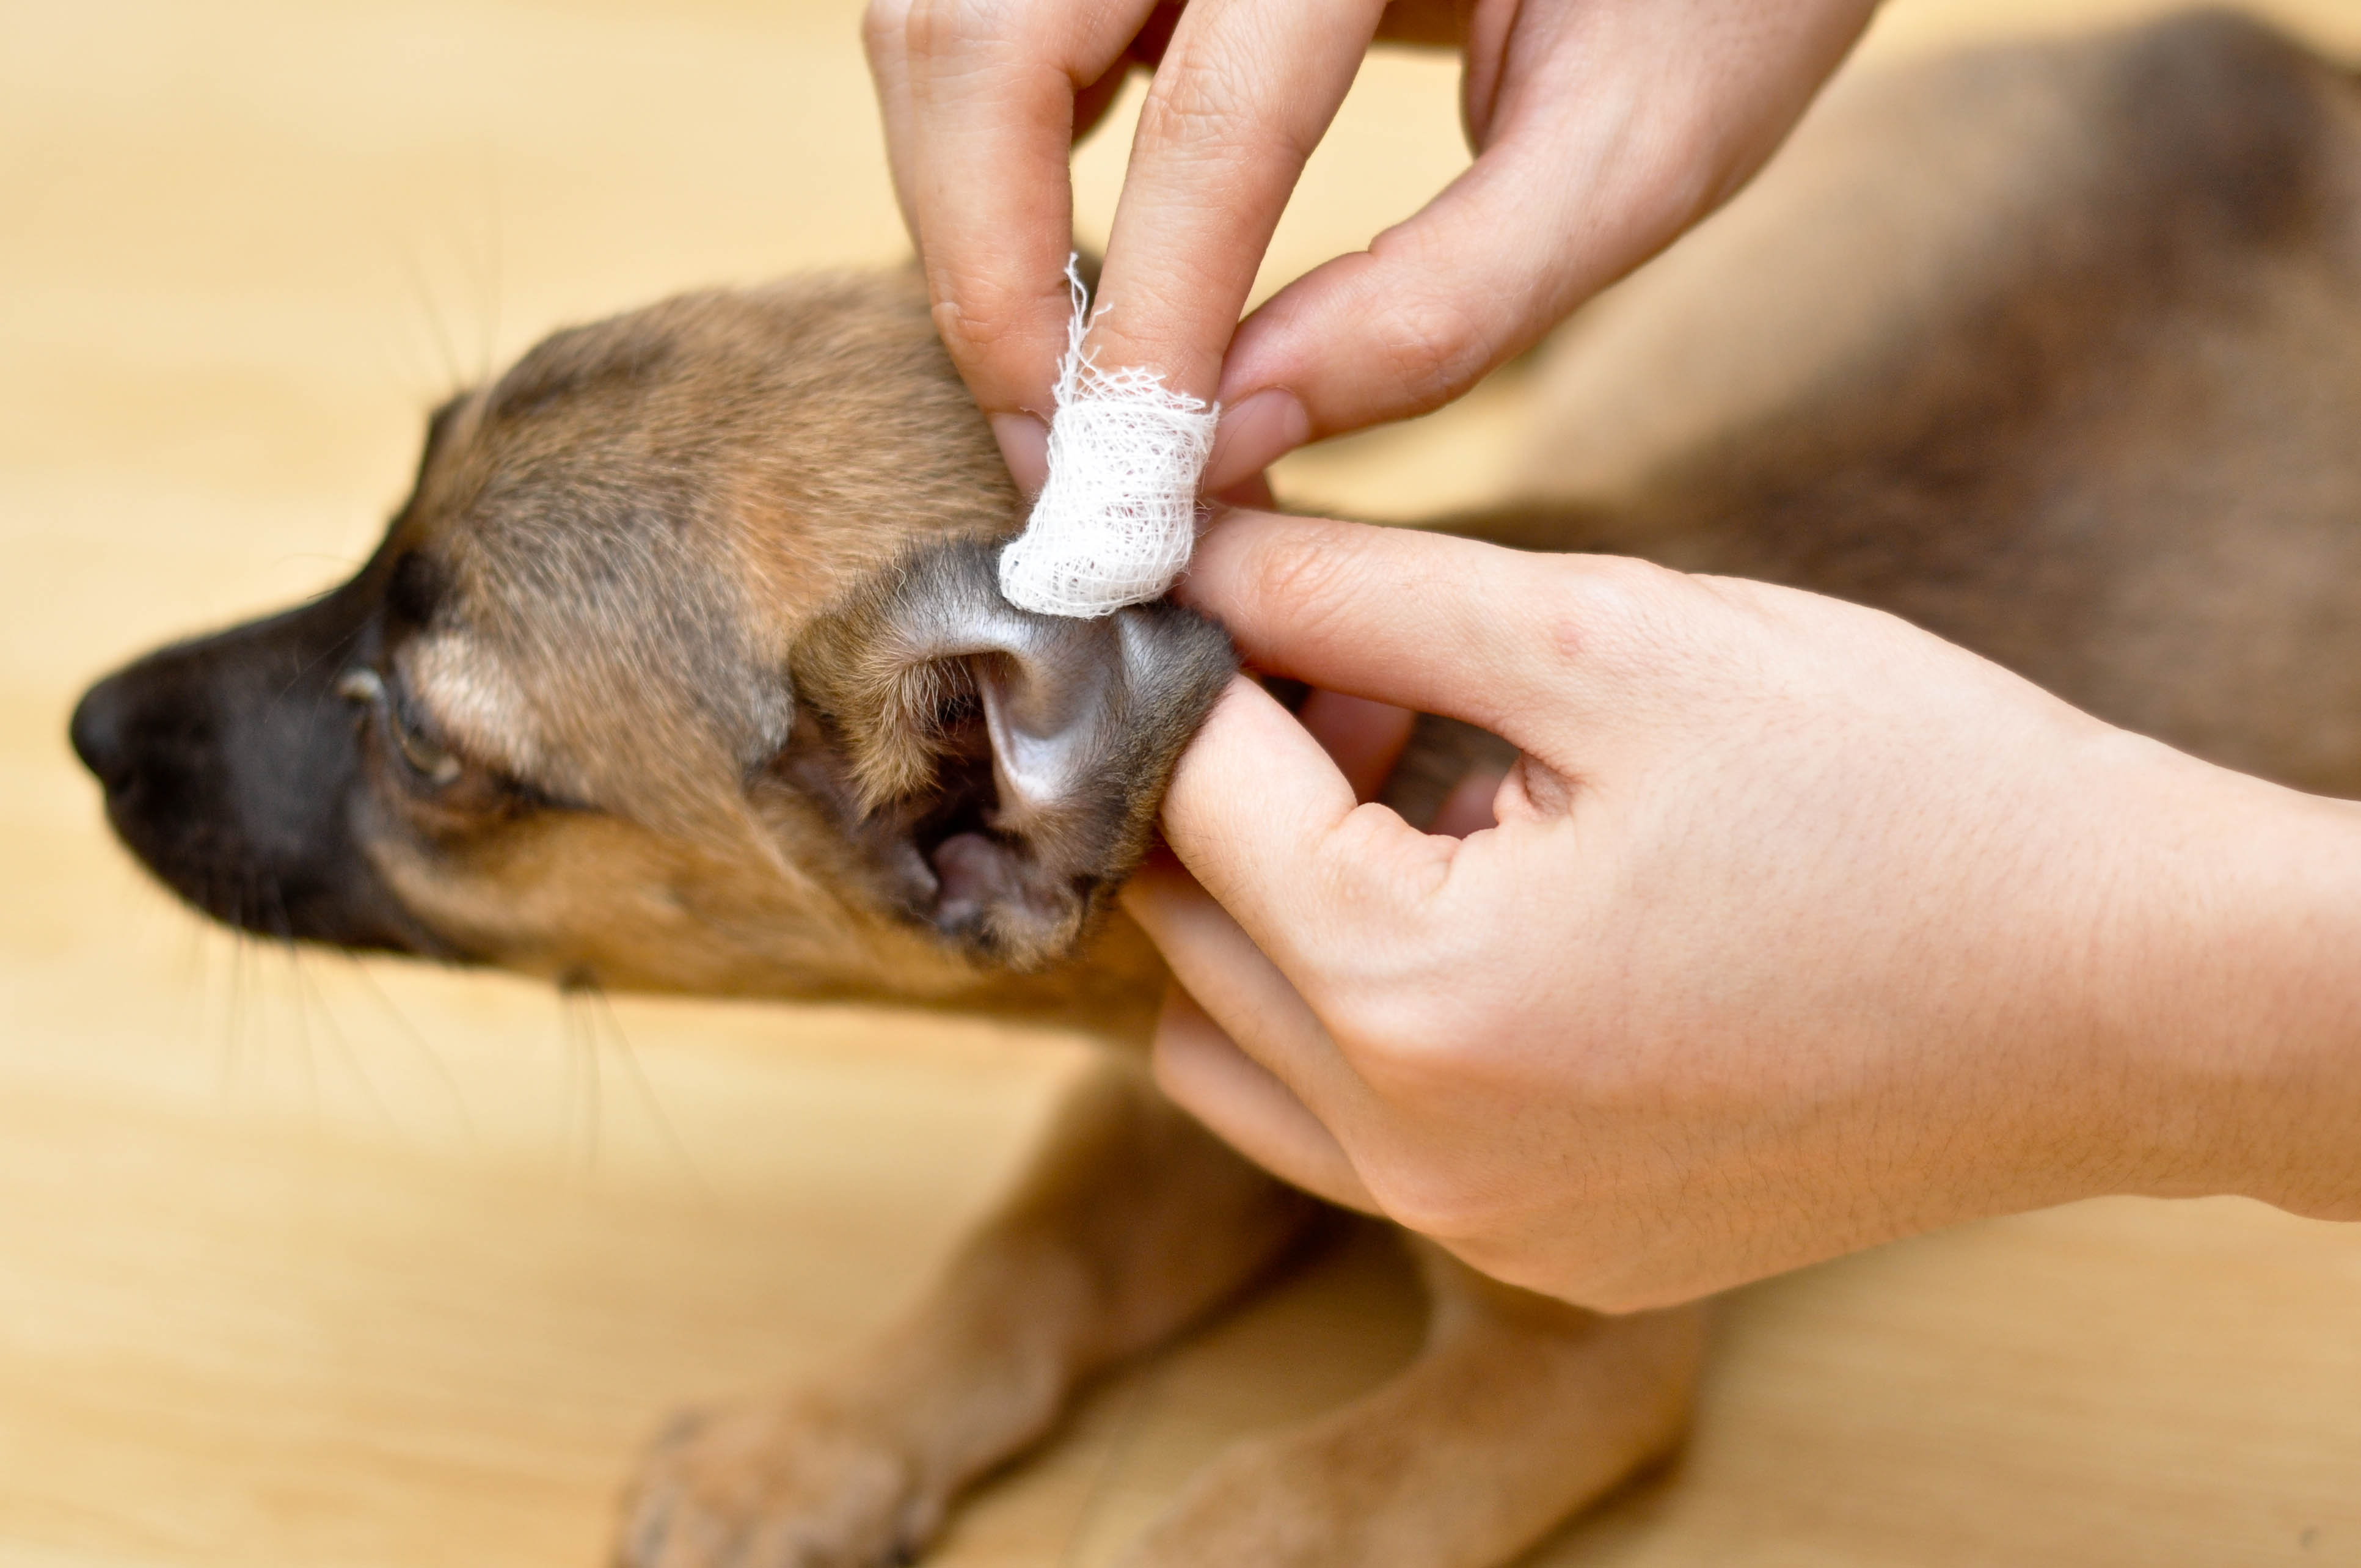 Clean your dog's ears to prevent ear canal problems